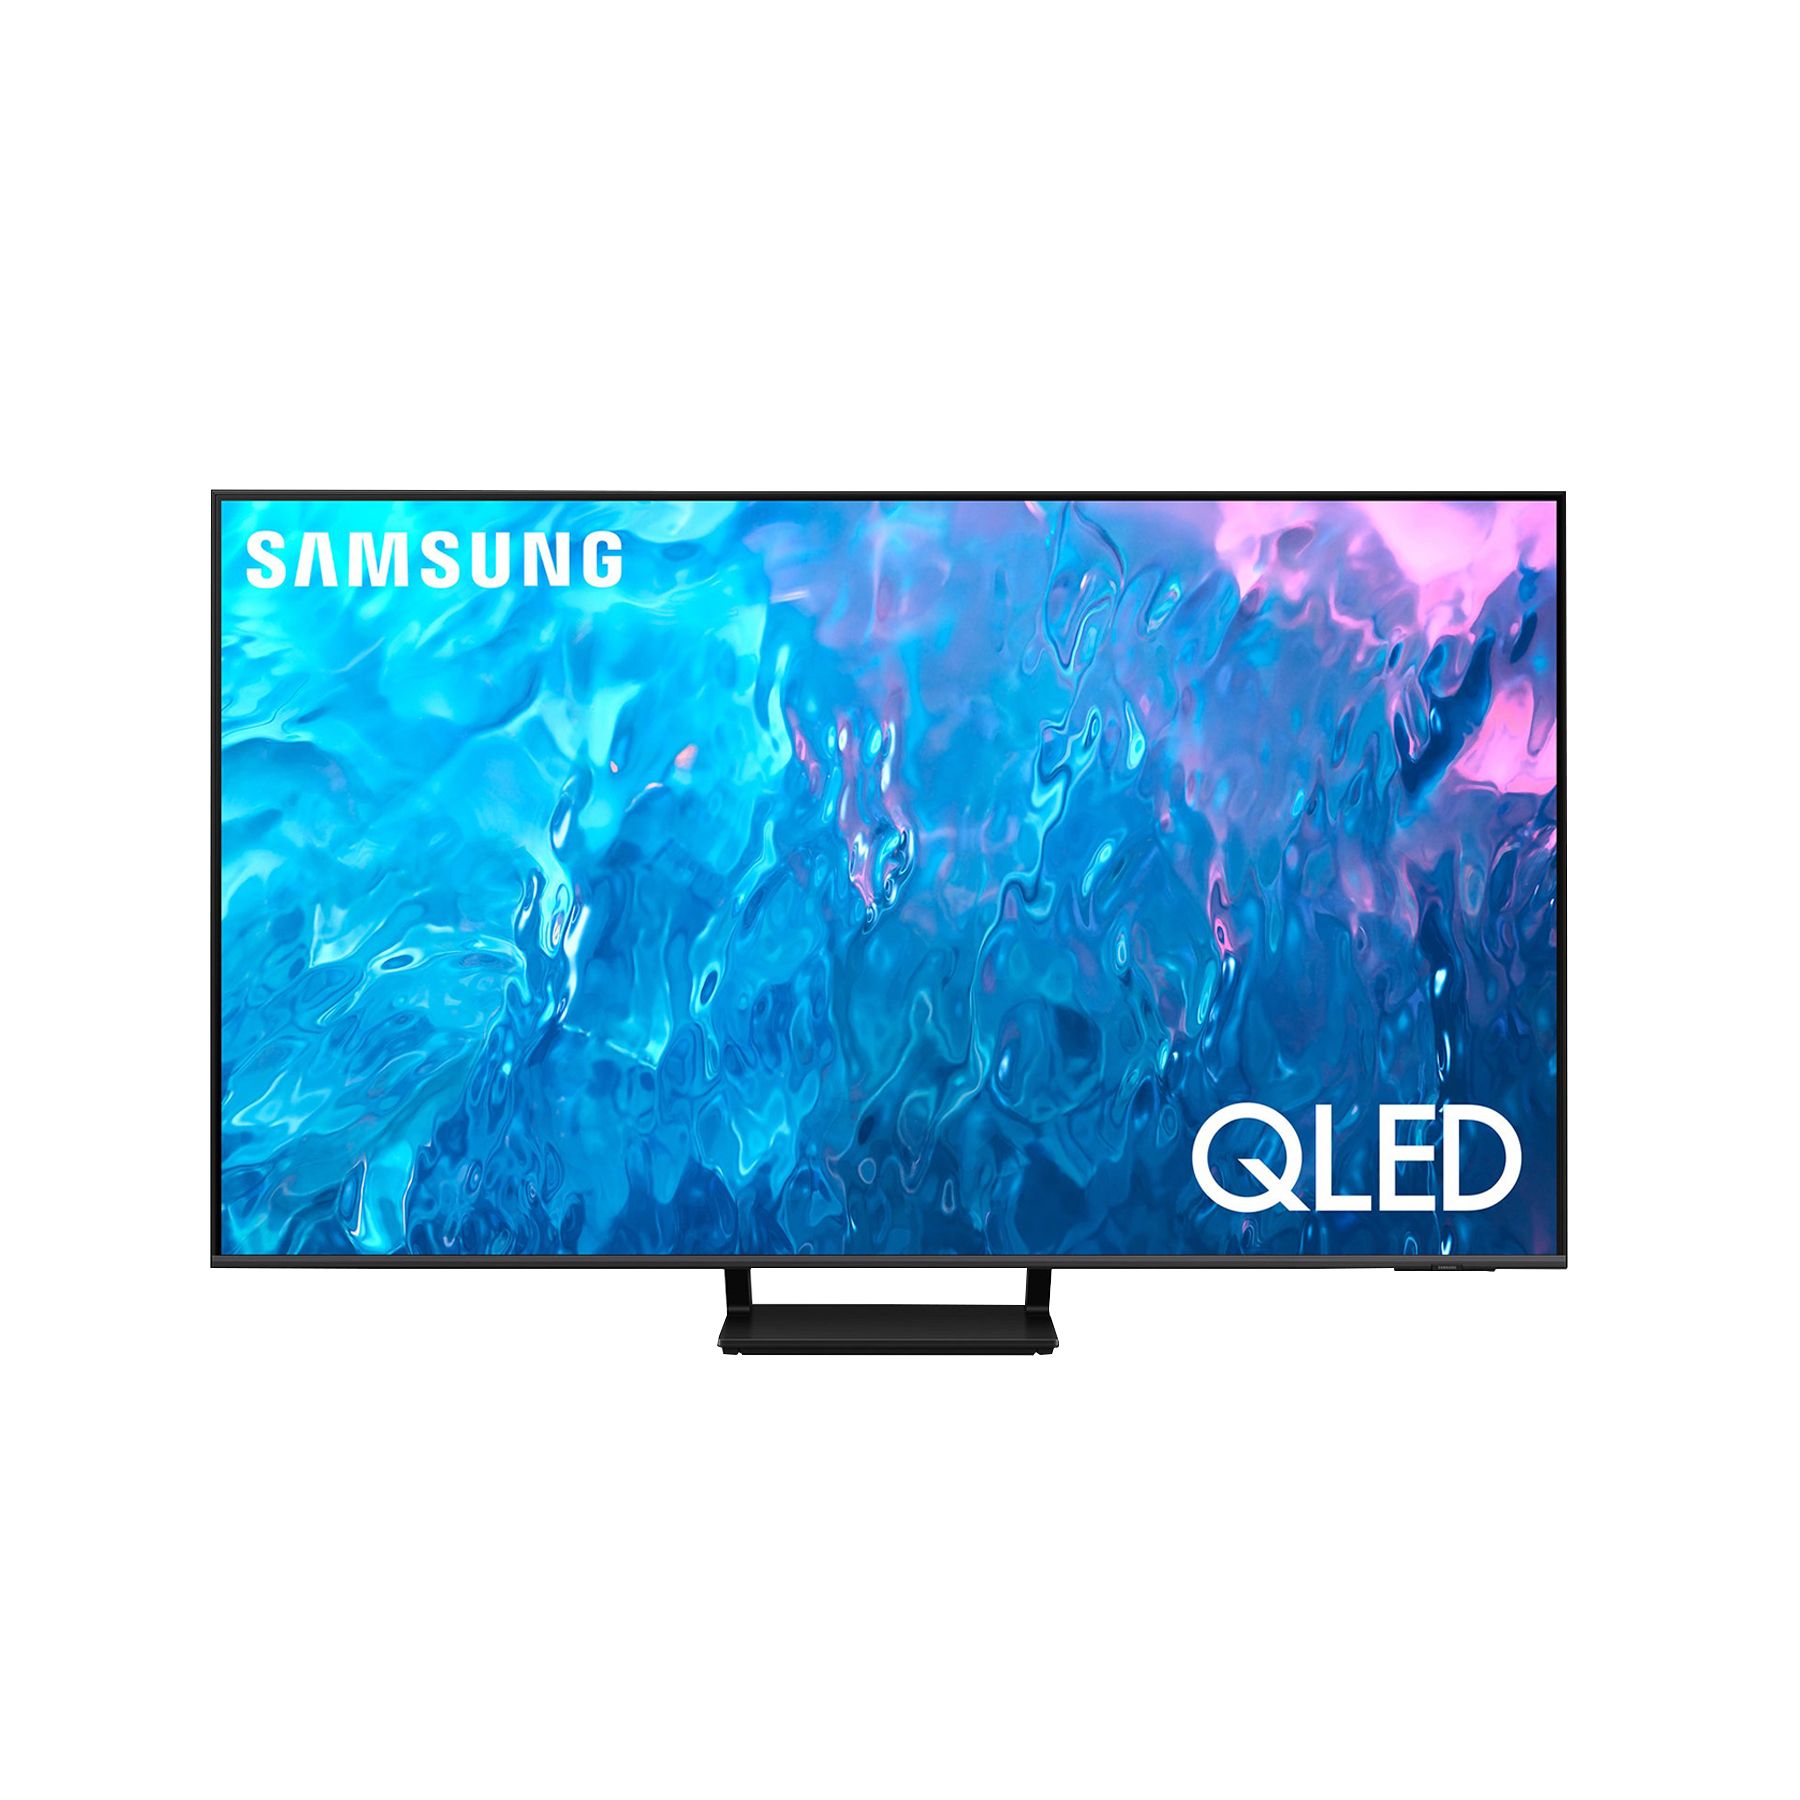 Samsung 65 Class - The Frame Series - 4K UHD QLED LCD TV - Allstate 3-Year  Protection Plan Bundle Included for 5 Years of Total Coverage*